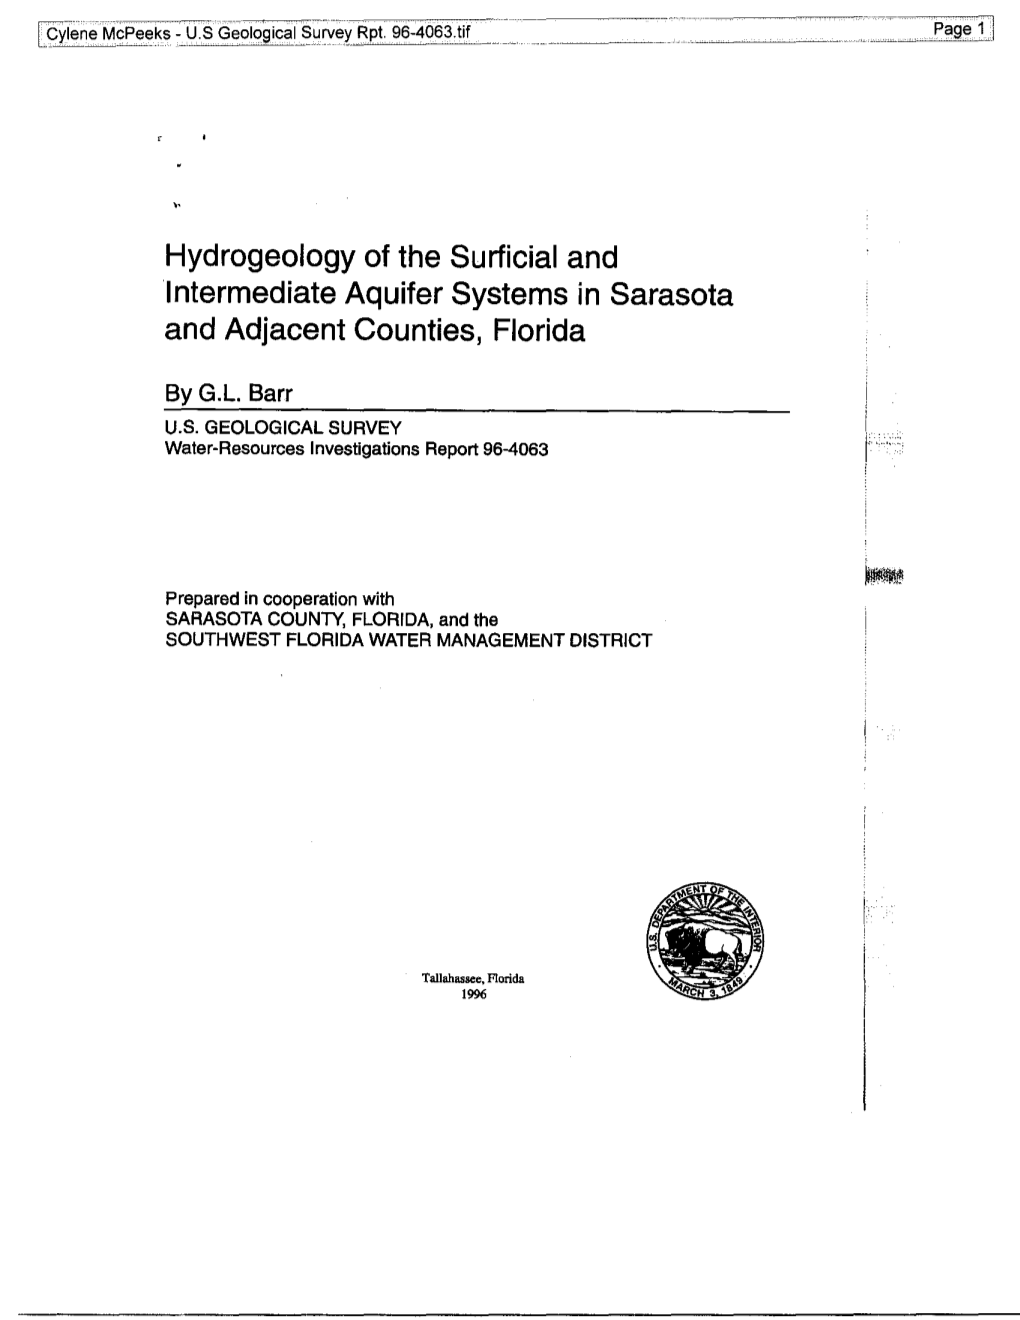 Hydrogeology of the Surficial and Intermediate Aquifer Systems in Sarasota and Adjacent Counties, Florida